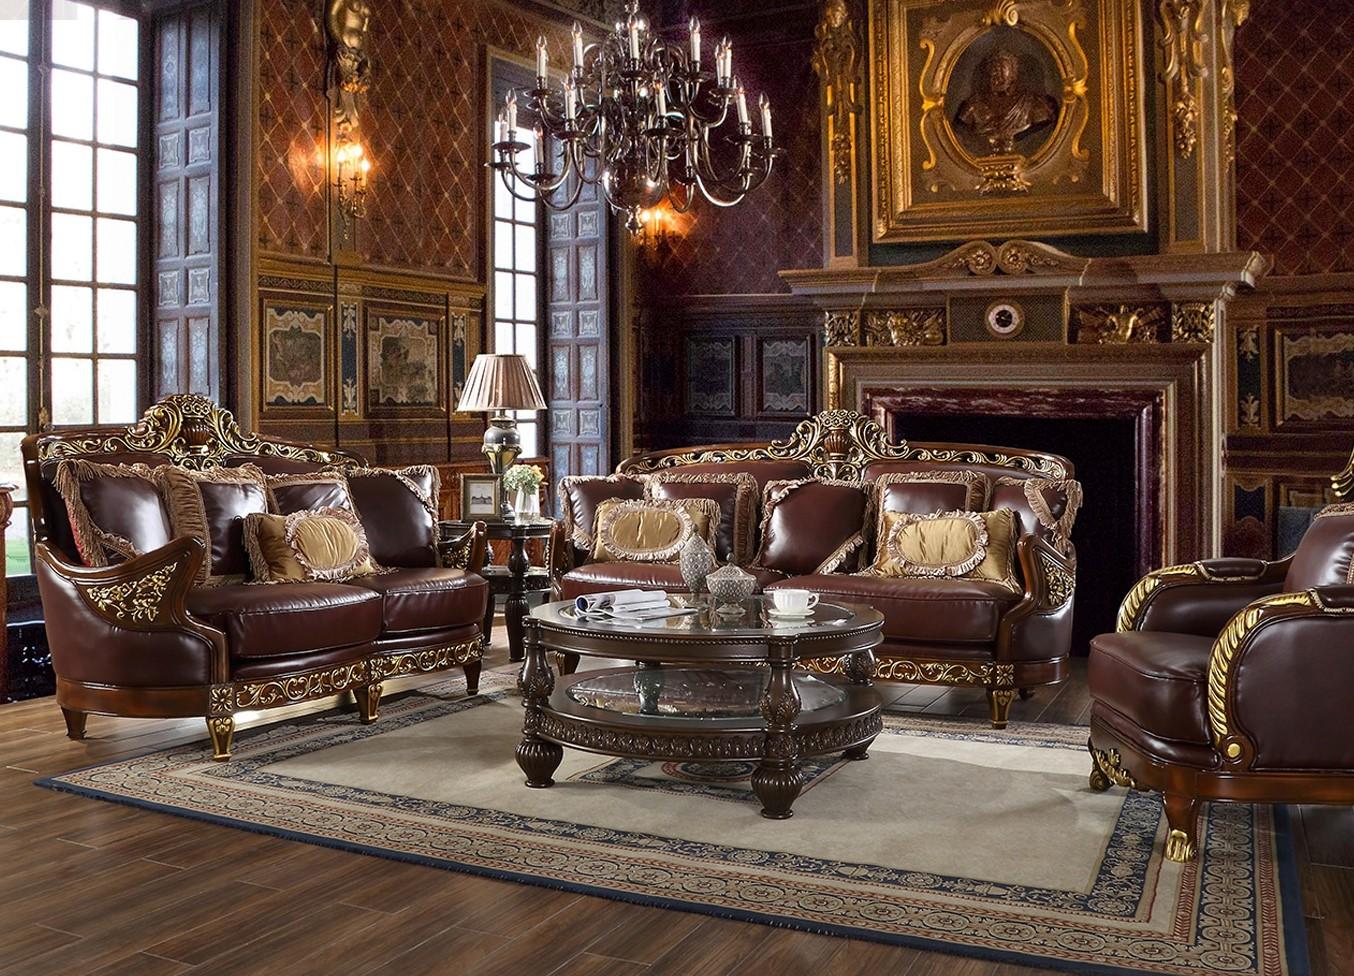 Traditional Sofa Set HD-89 3PC SOFA SET / HD-1521 – COFFEE TABLE / HD-1521 – END TABLE HD-89-5PC in Mahogany, Brown Leather